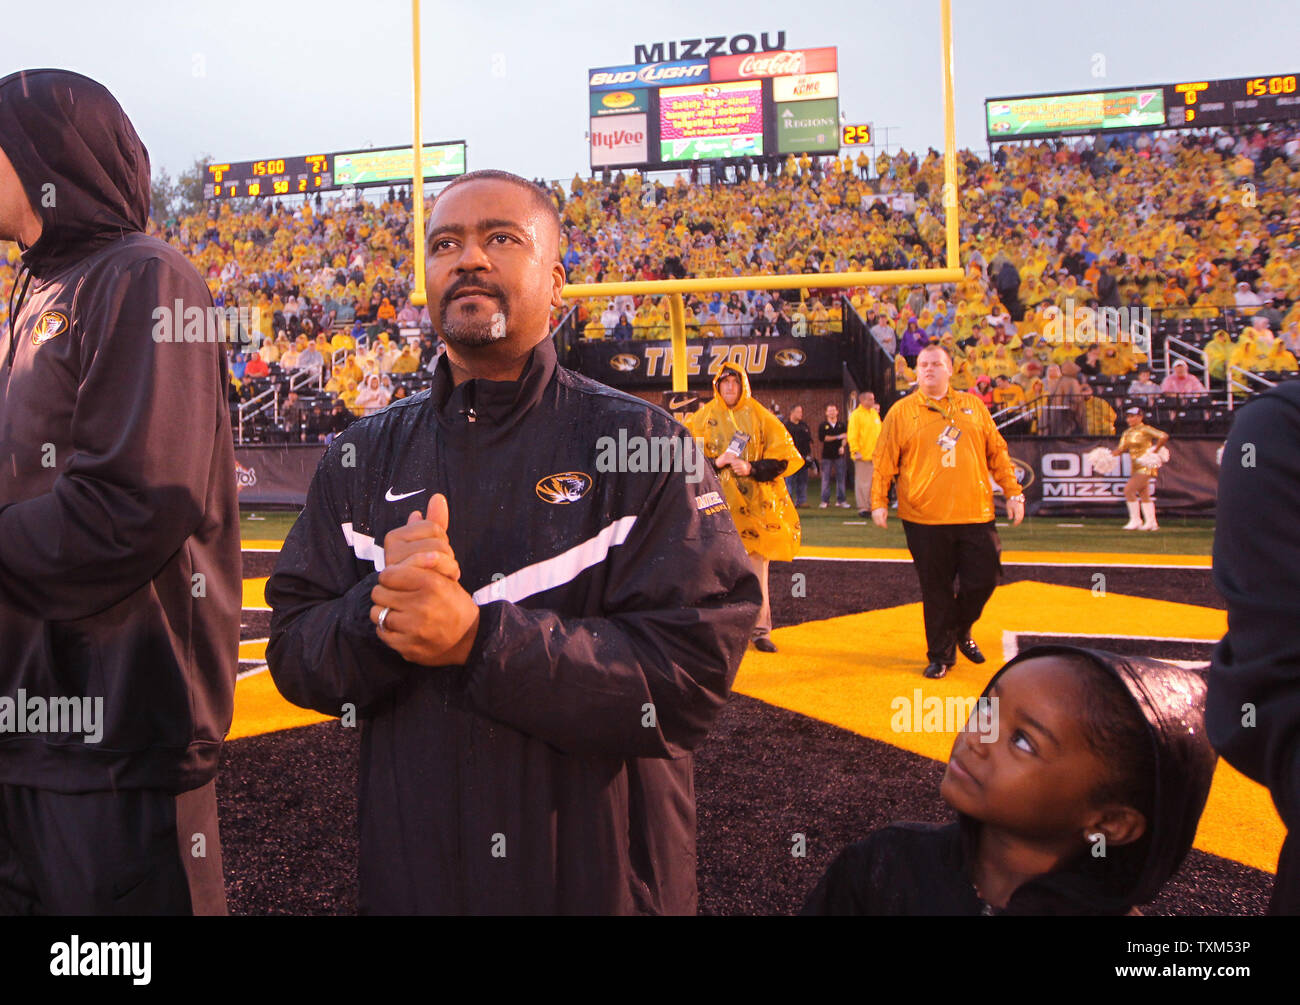 Missouri Tigers head basketball coach Frank Haith watches a video board while his daughter Brianna keeps an eye on her dad, during team introductions during the Alabama - Missouri football game at Faurot Field in Columbia, Missouri on October 13, 2012.   UPI/Bill Greenblatt Stock Photo